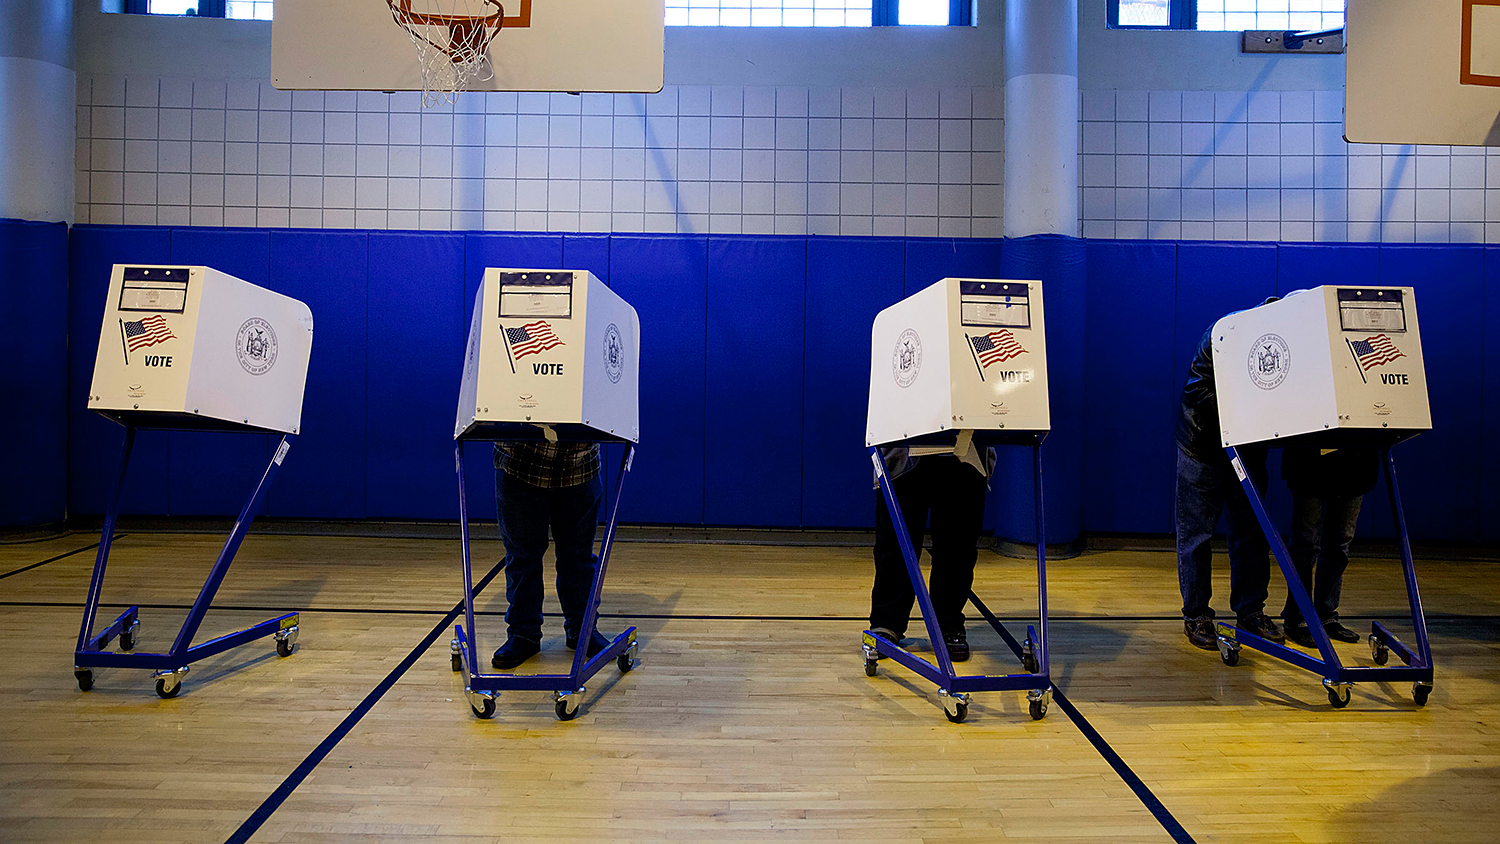 Voters cast ballots in New York on Nov. 6, 2012.
